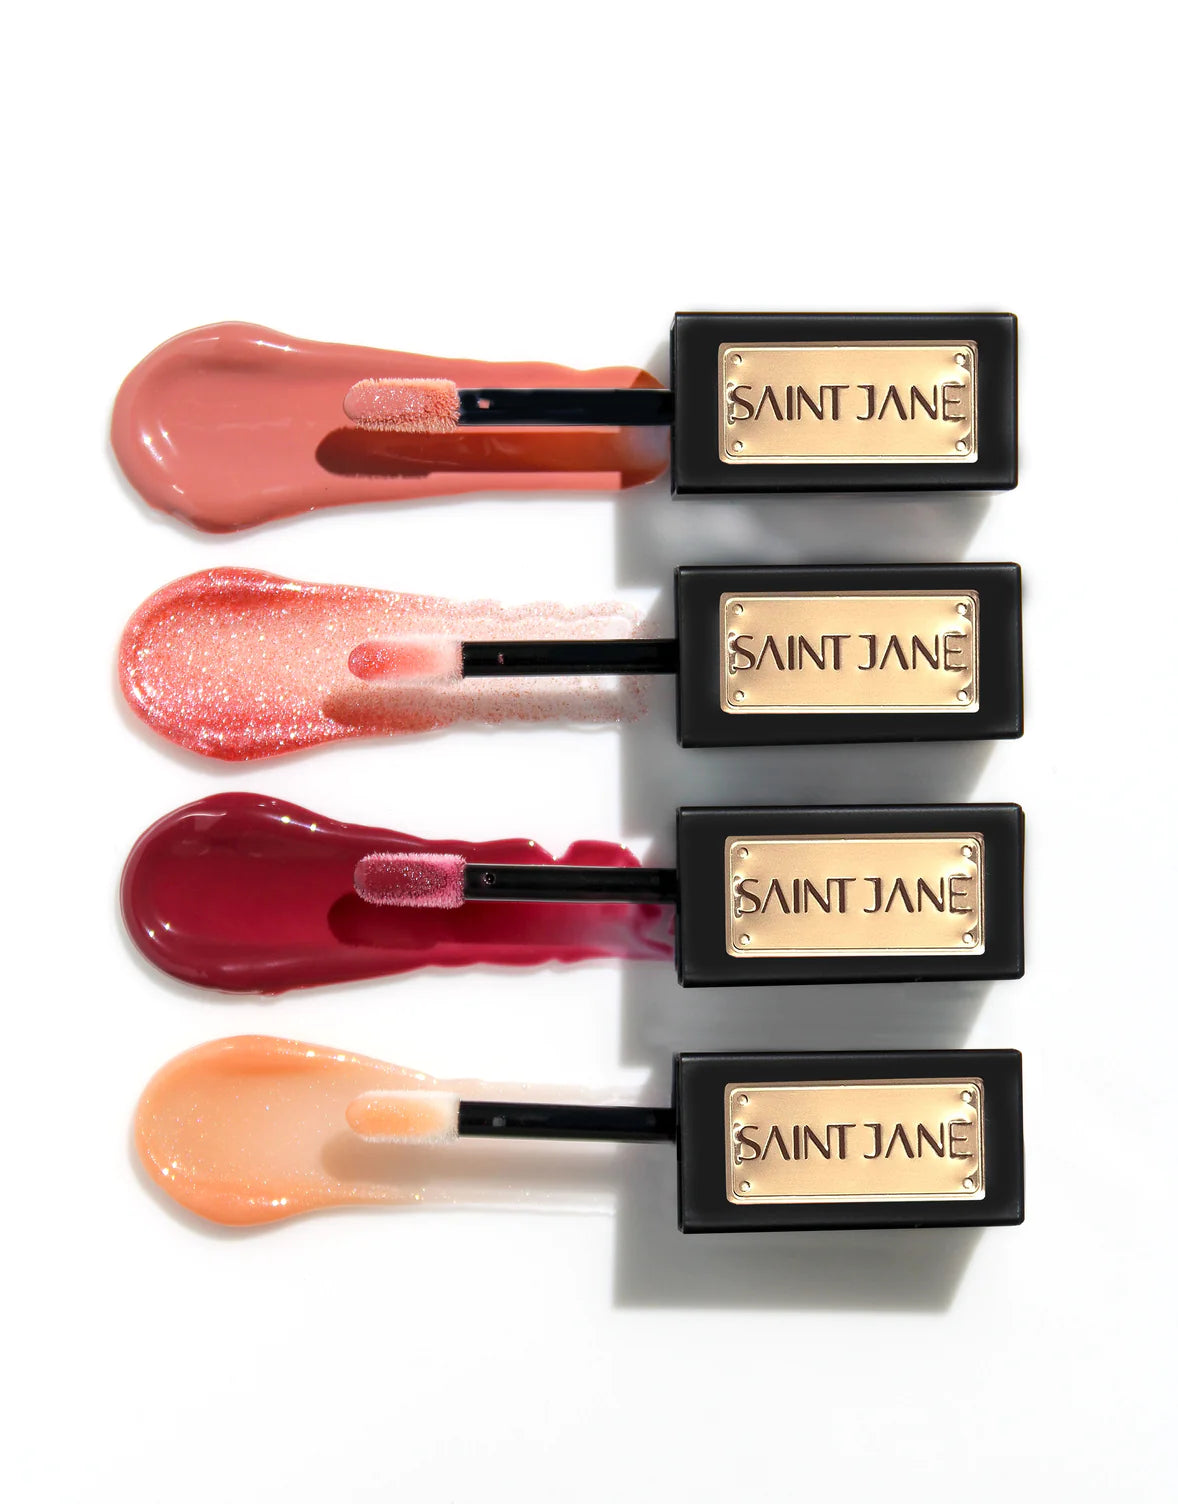 Saint Jane Beauty - Limited Edition! Lip Oil Collection